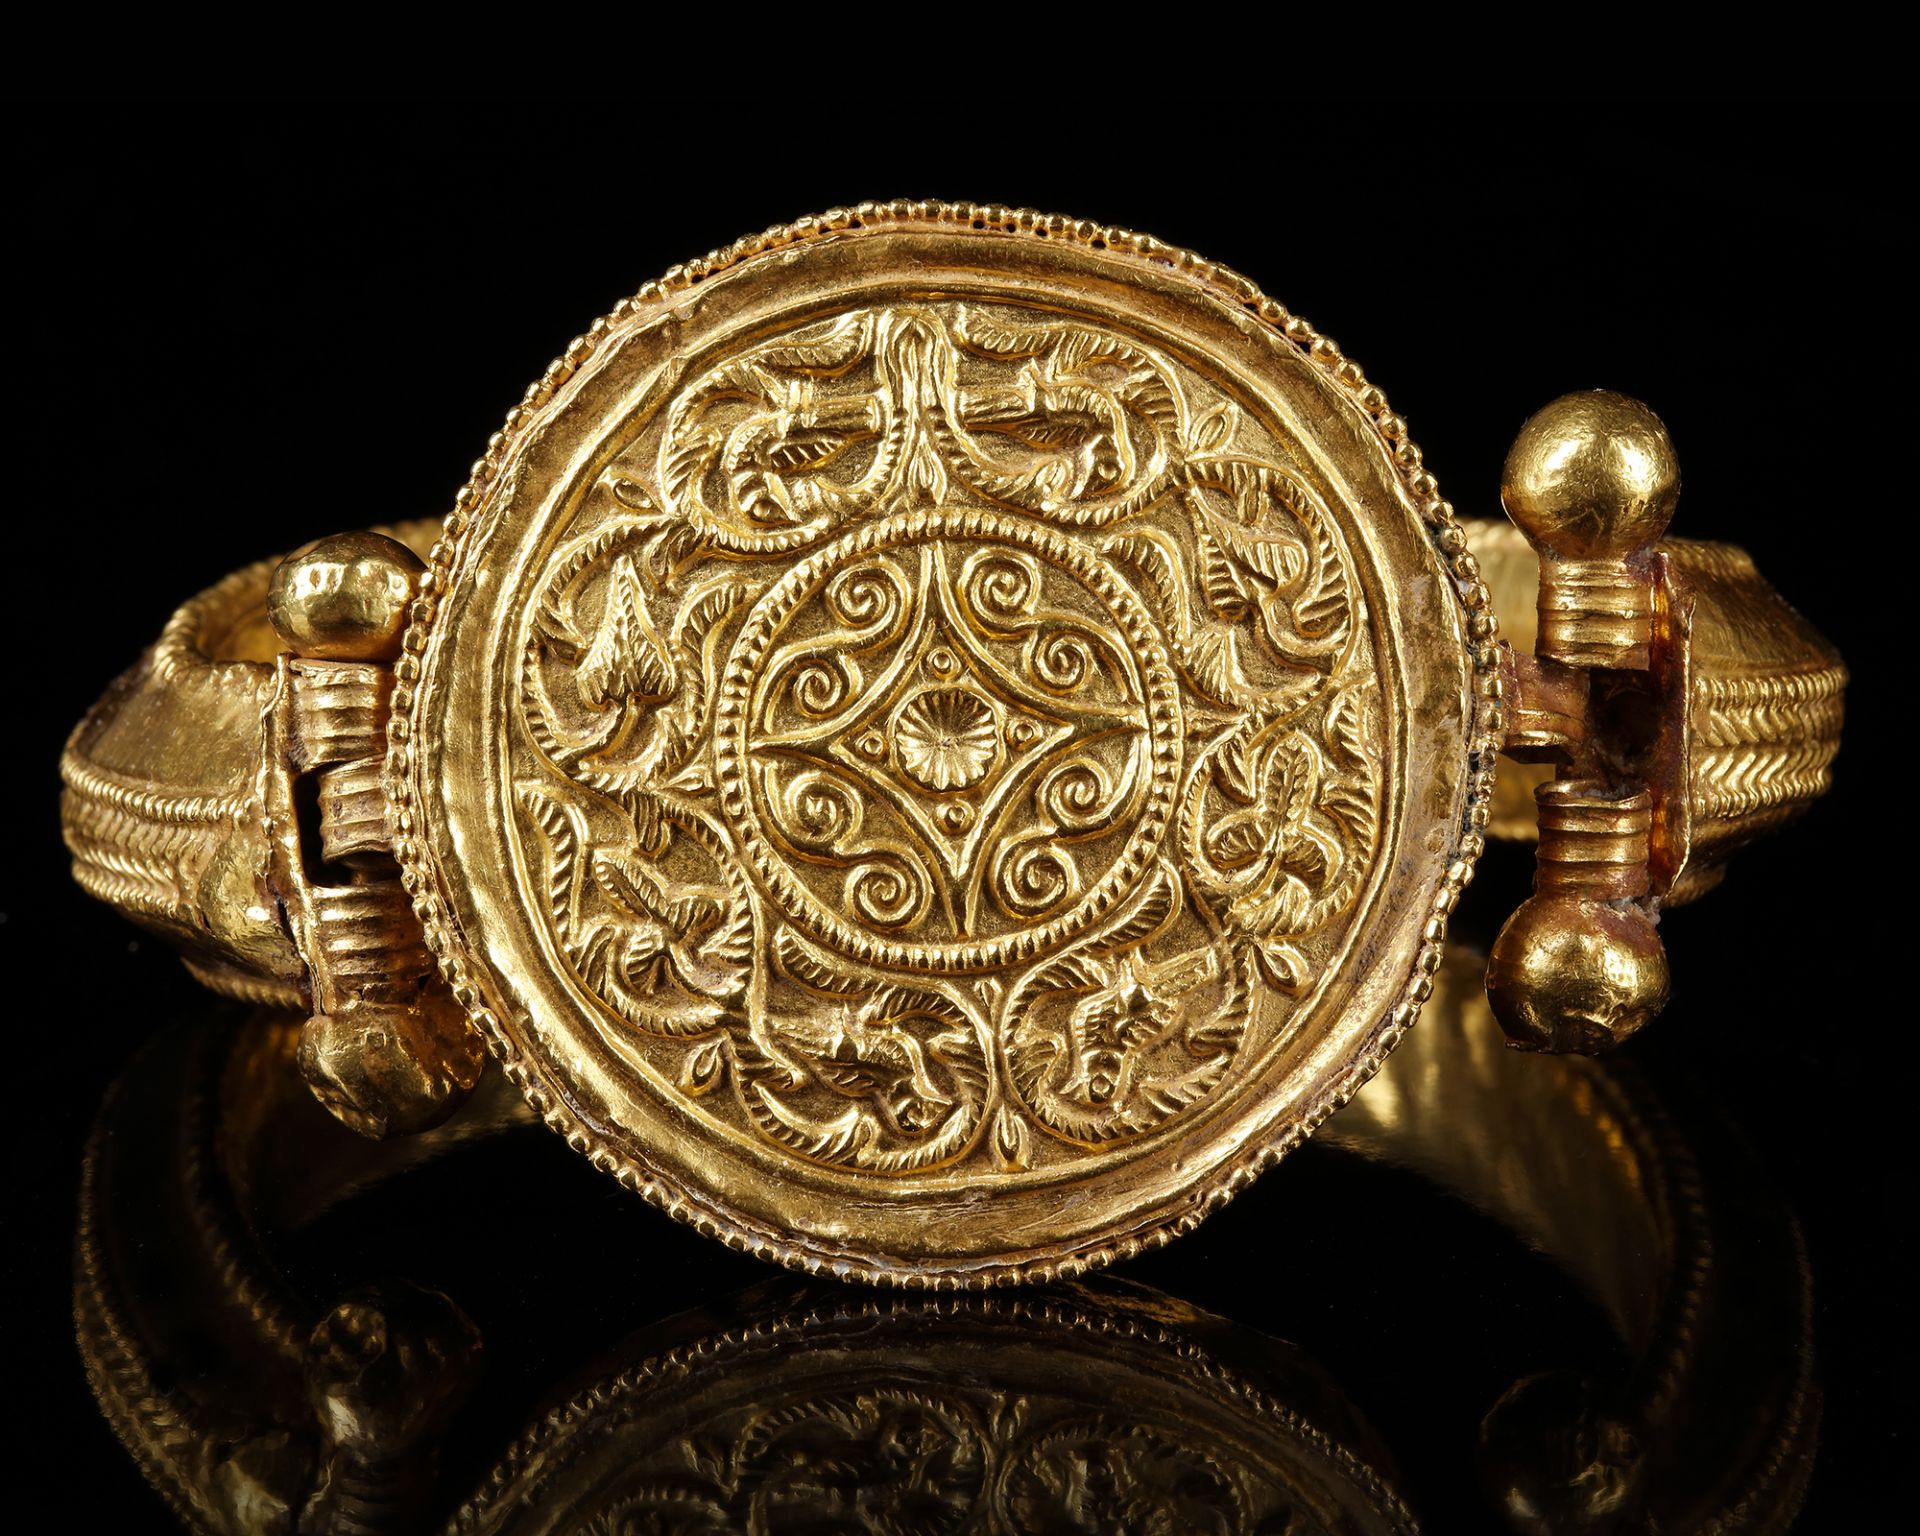 A RARE PAIR OF A FATIMID GOLD BRACELETS, POSSIBLY SYRIA, 11TH CENTURY - Image 8 of 14